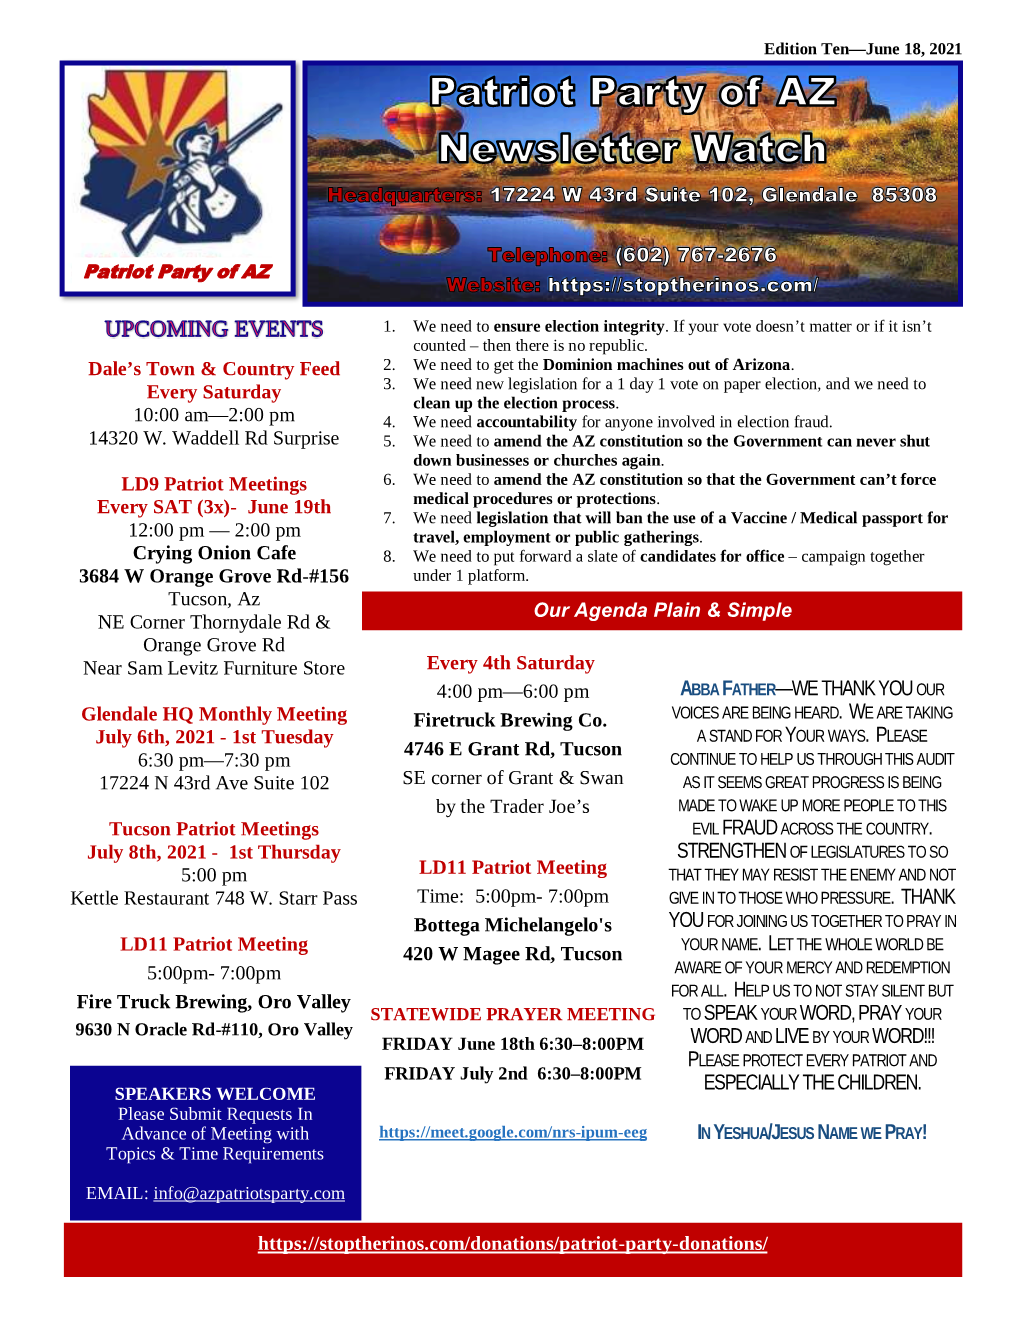 Download Our Latest Newsletter